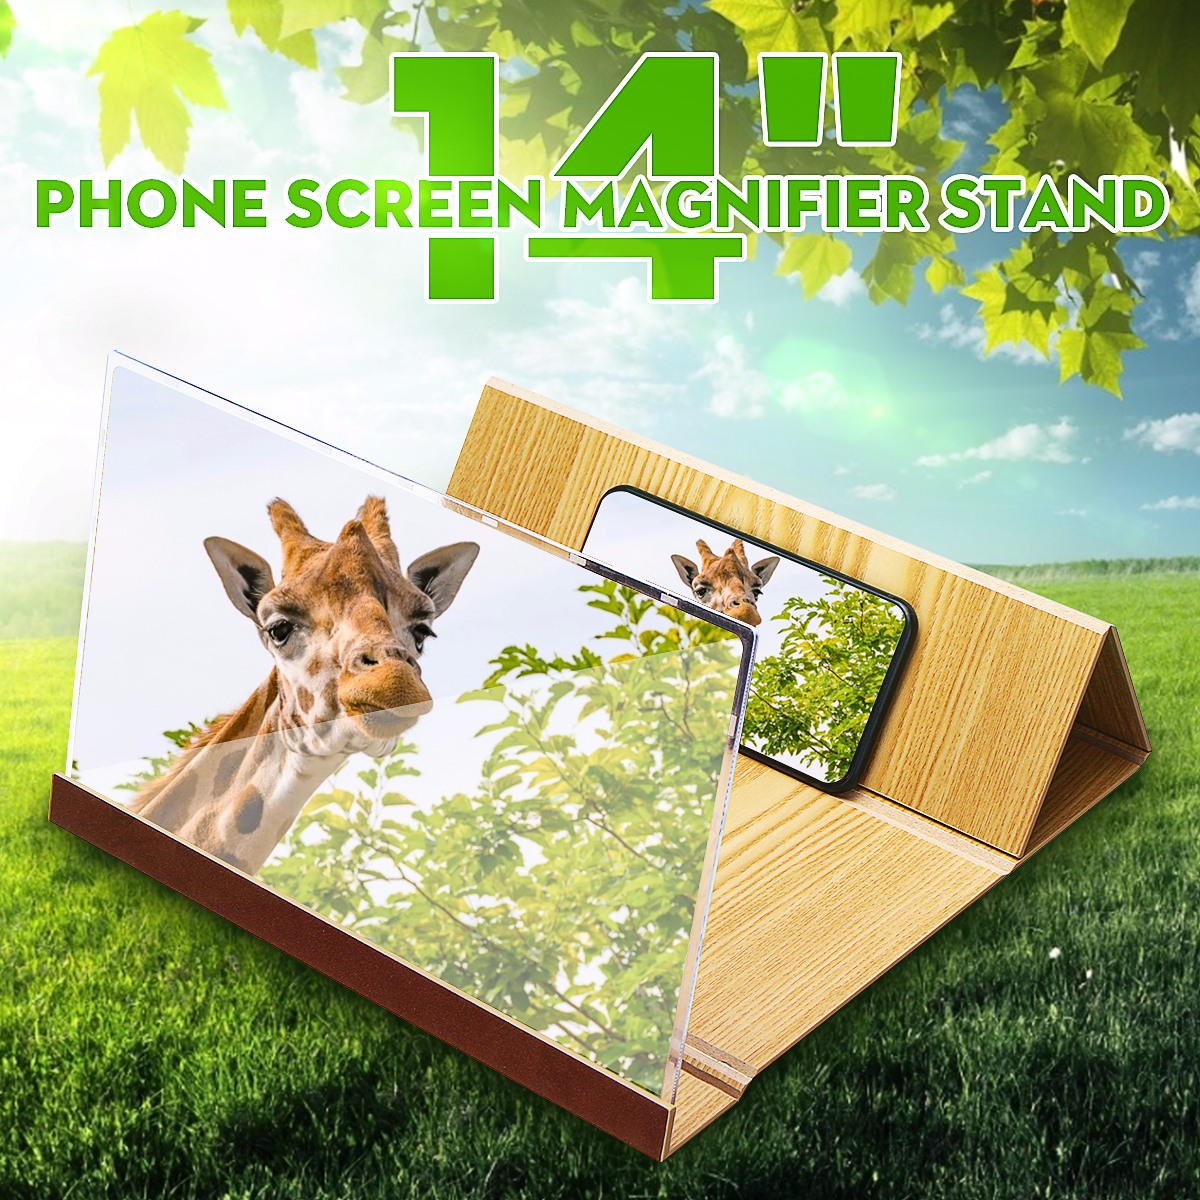 14quot-Wood-3D-HD-Phone-Screen-Magnifier-Video-Movie-Amplifier-For-Smart-Phone-iPhone-Samsung-Huawei-1539696-3